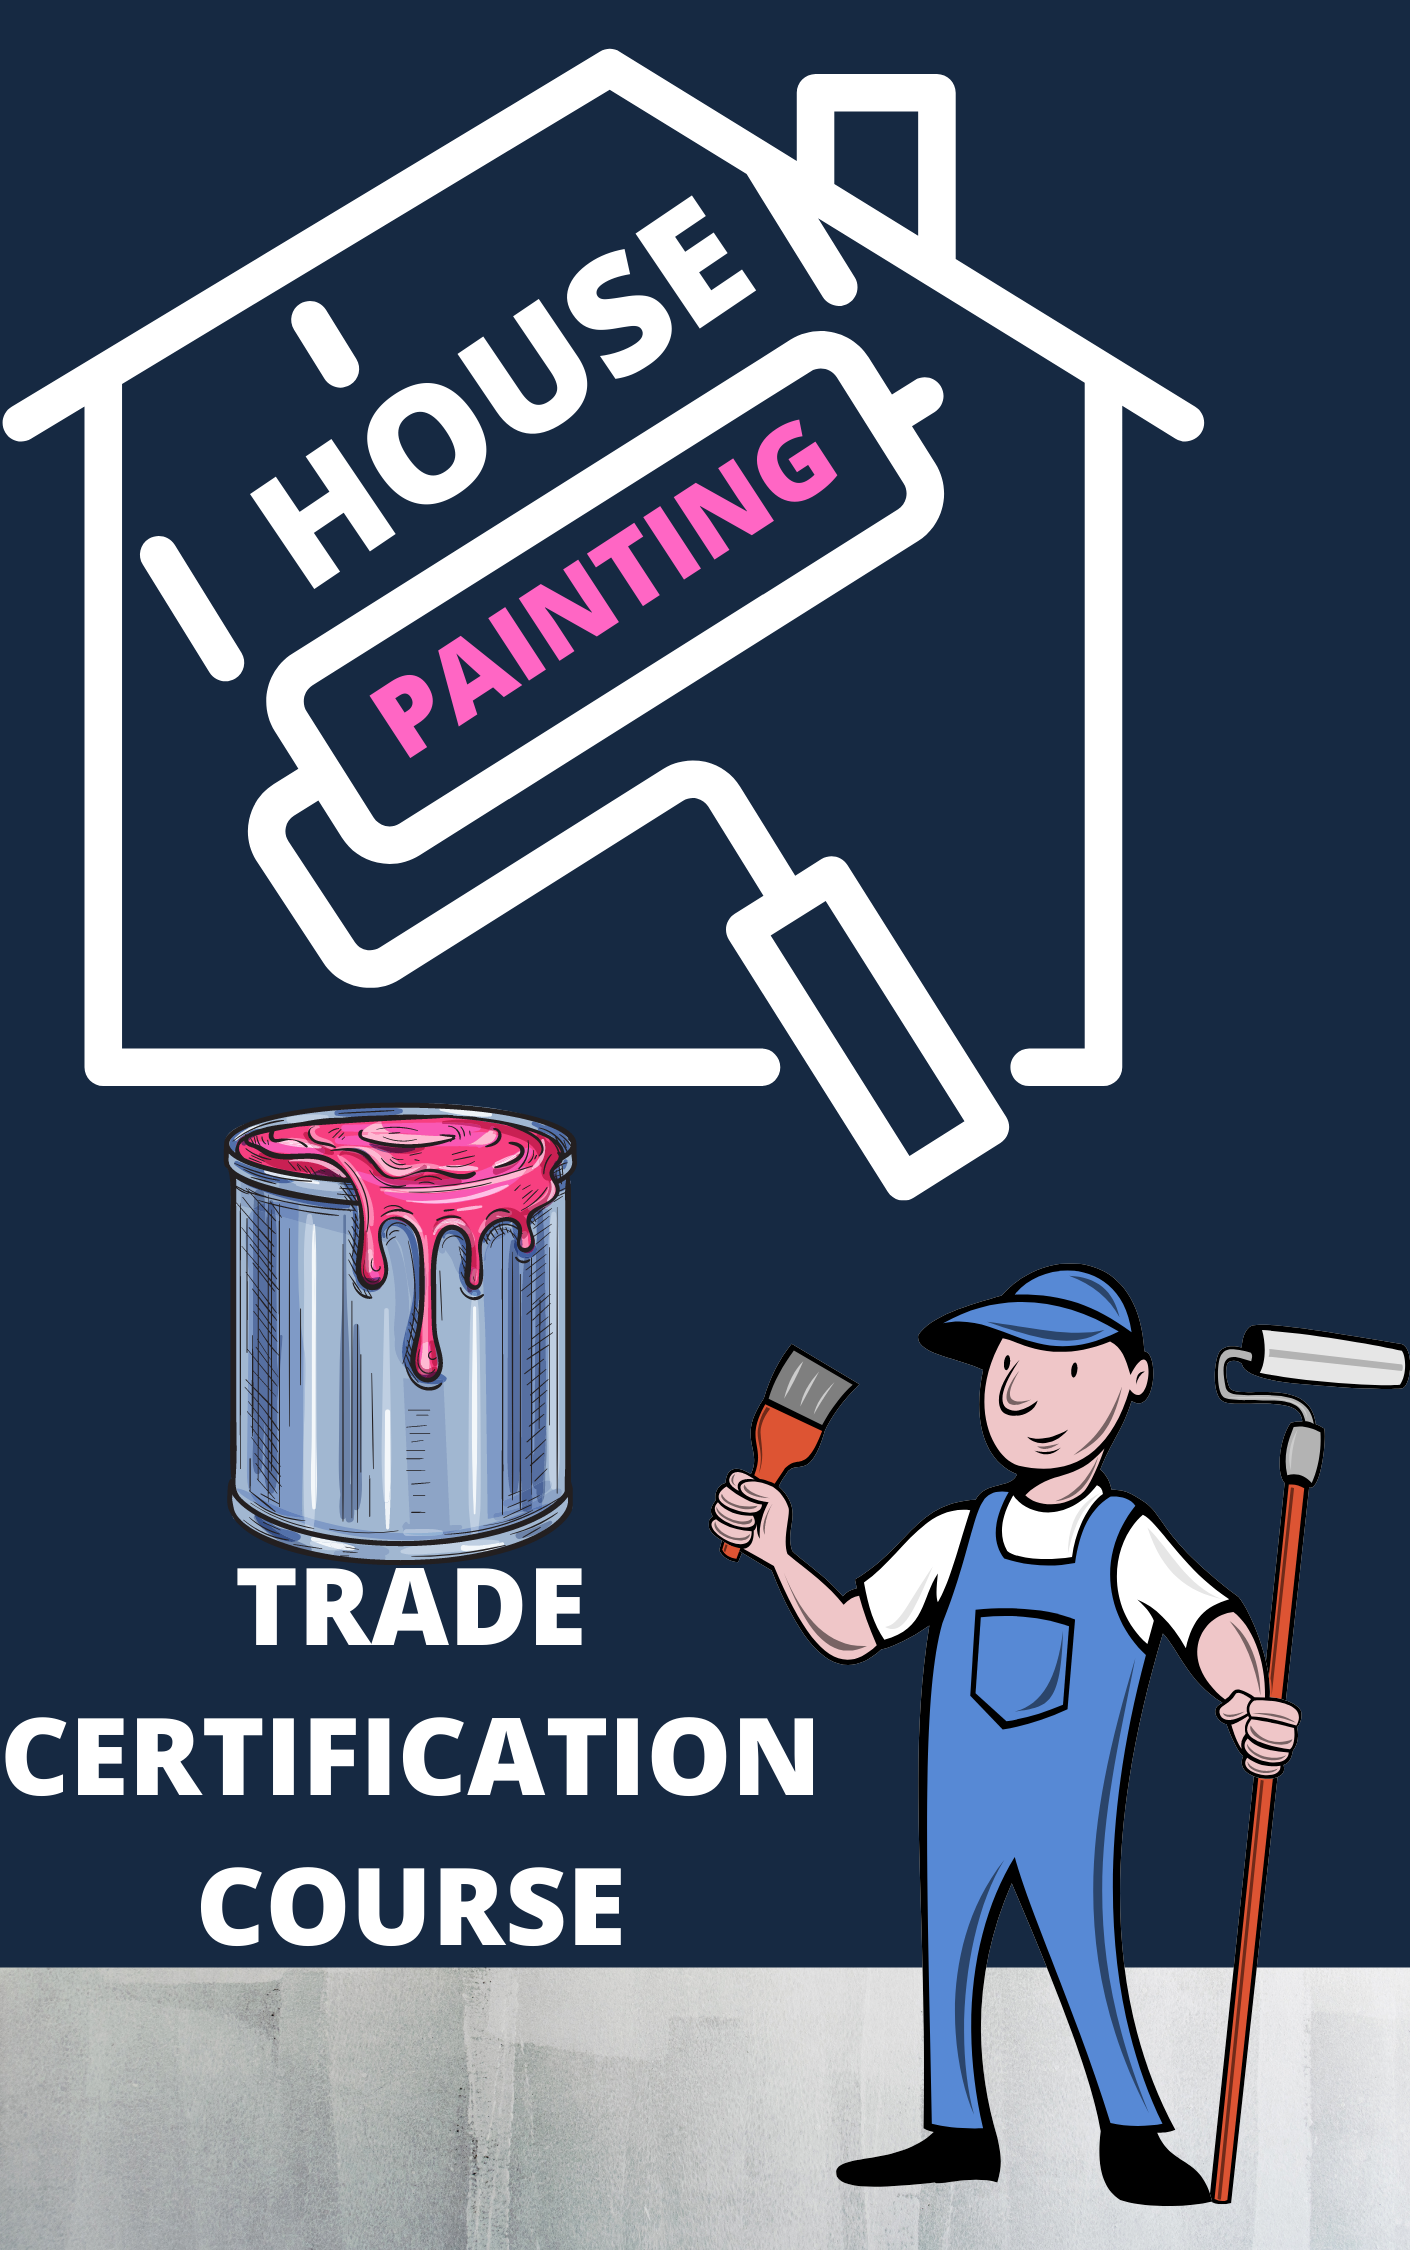 HOUSE PAINTING TRADE CERTIFICATION COURSE